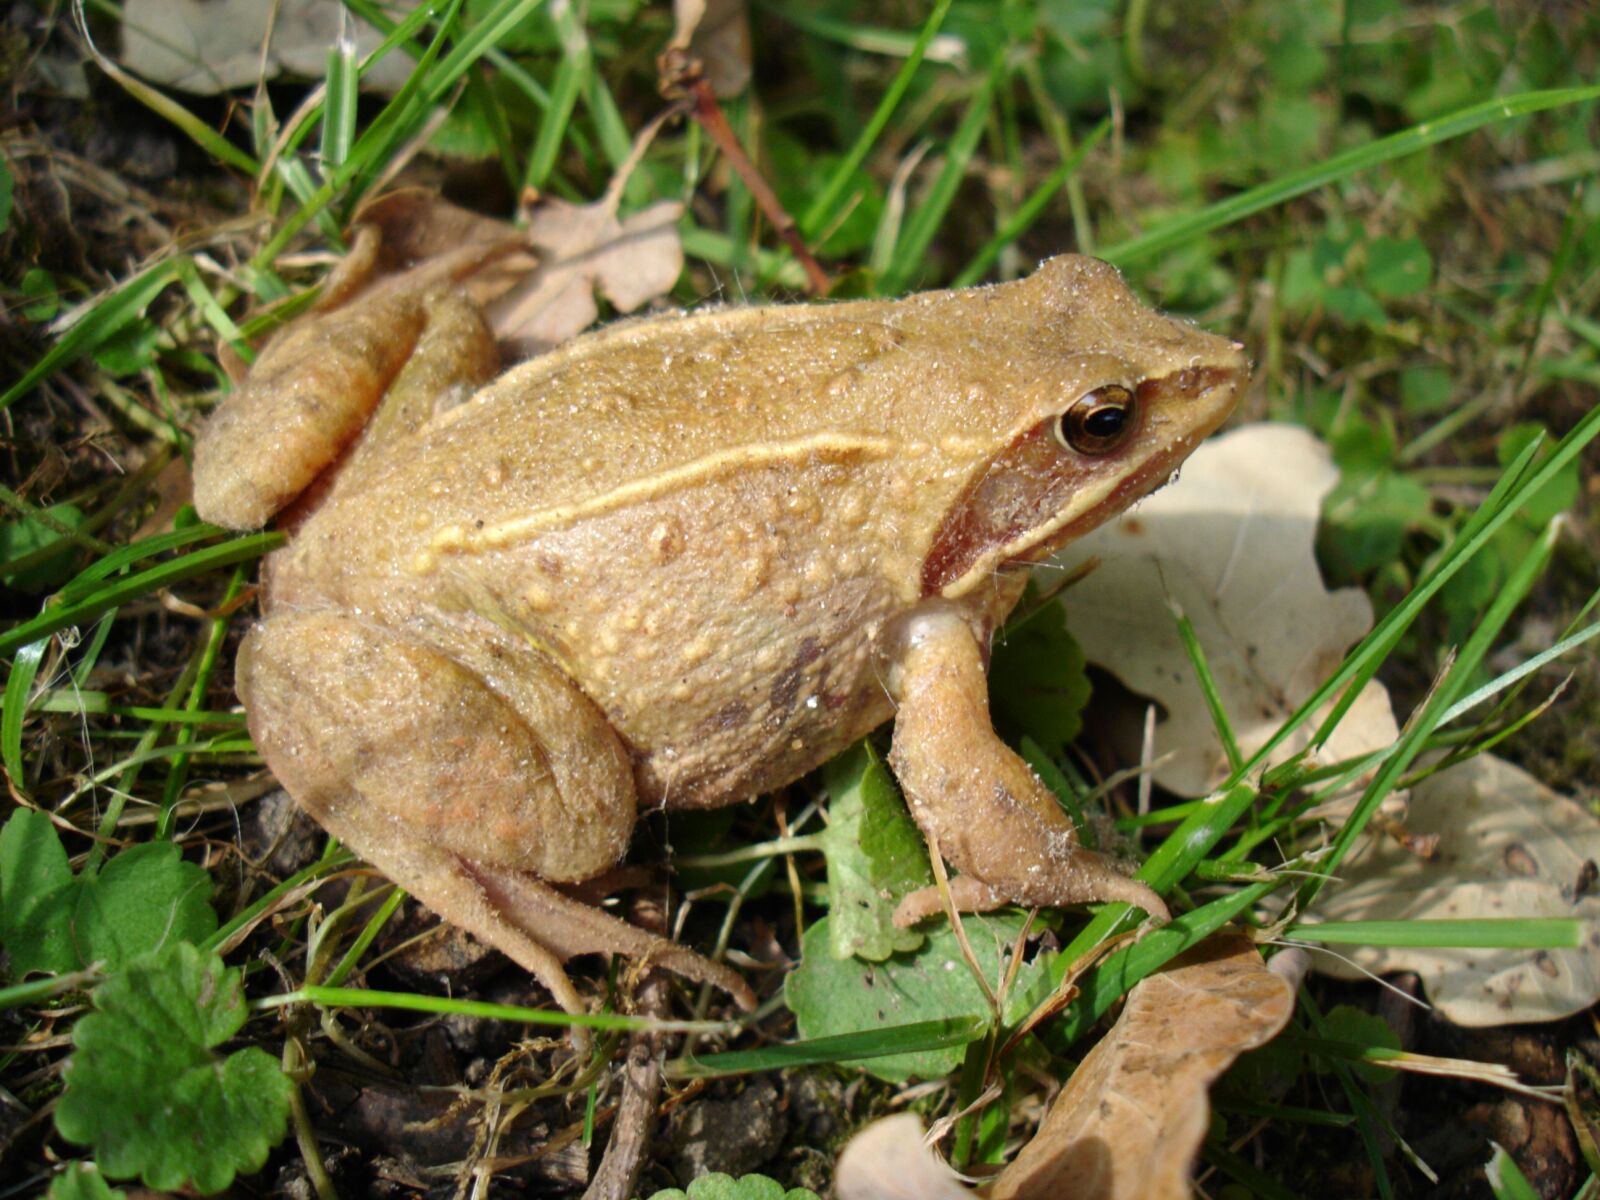 Sony DSC-W1 sample photo. Toad, meadow, nature photography